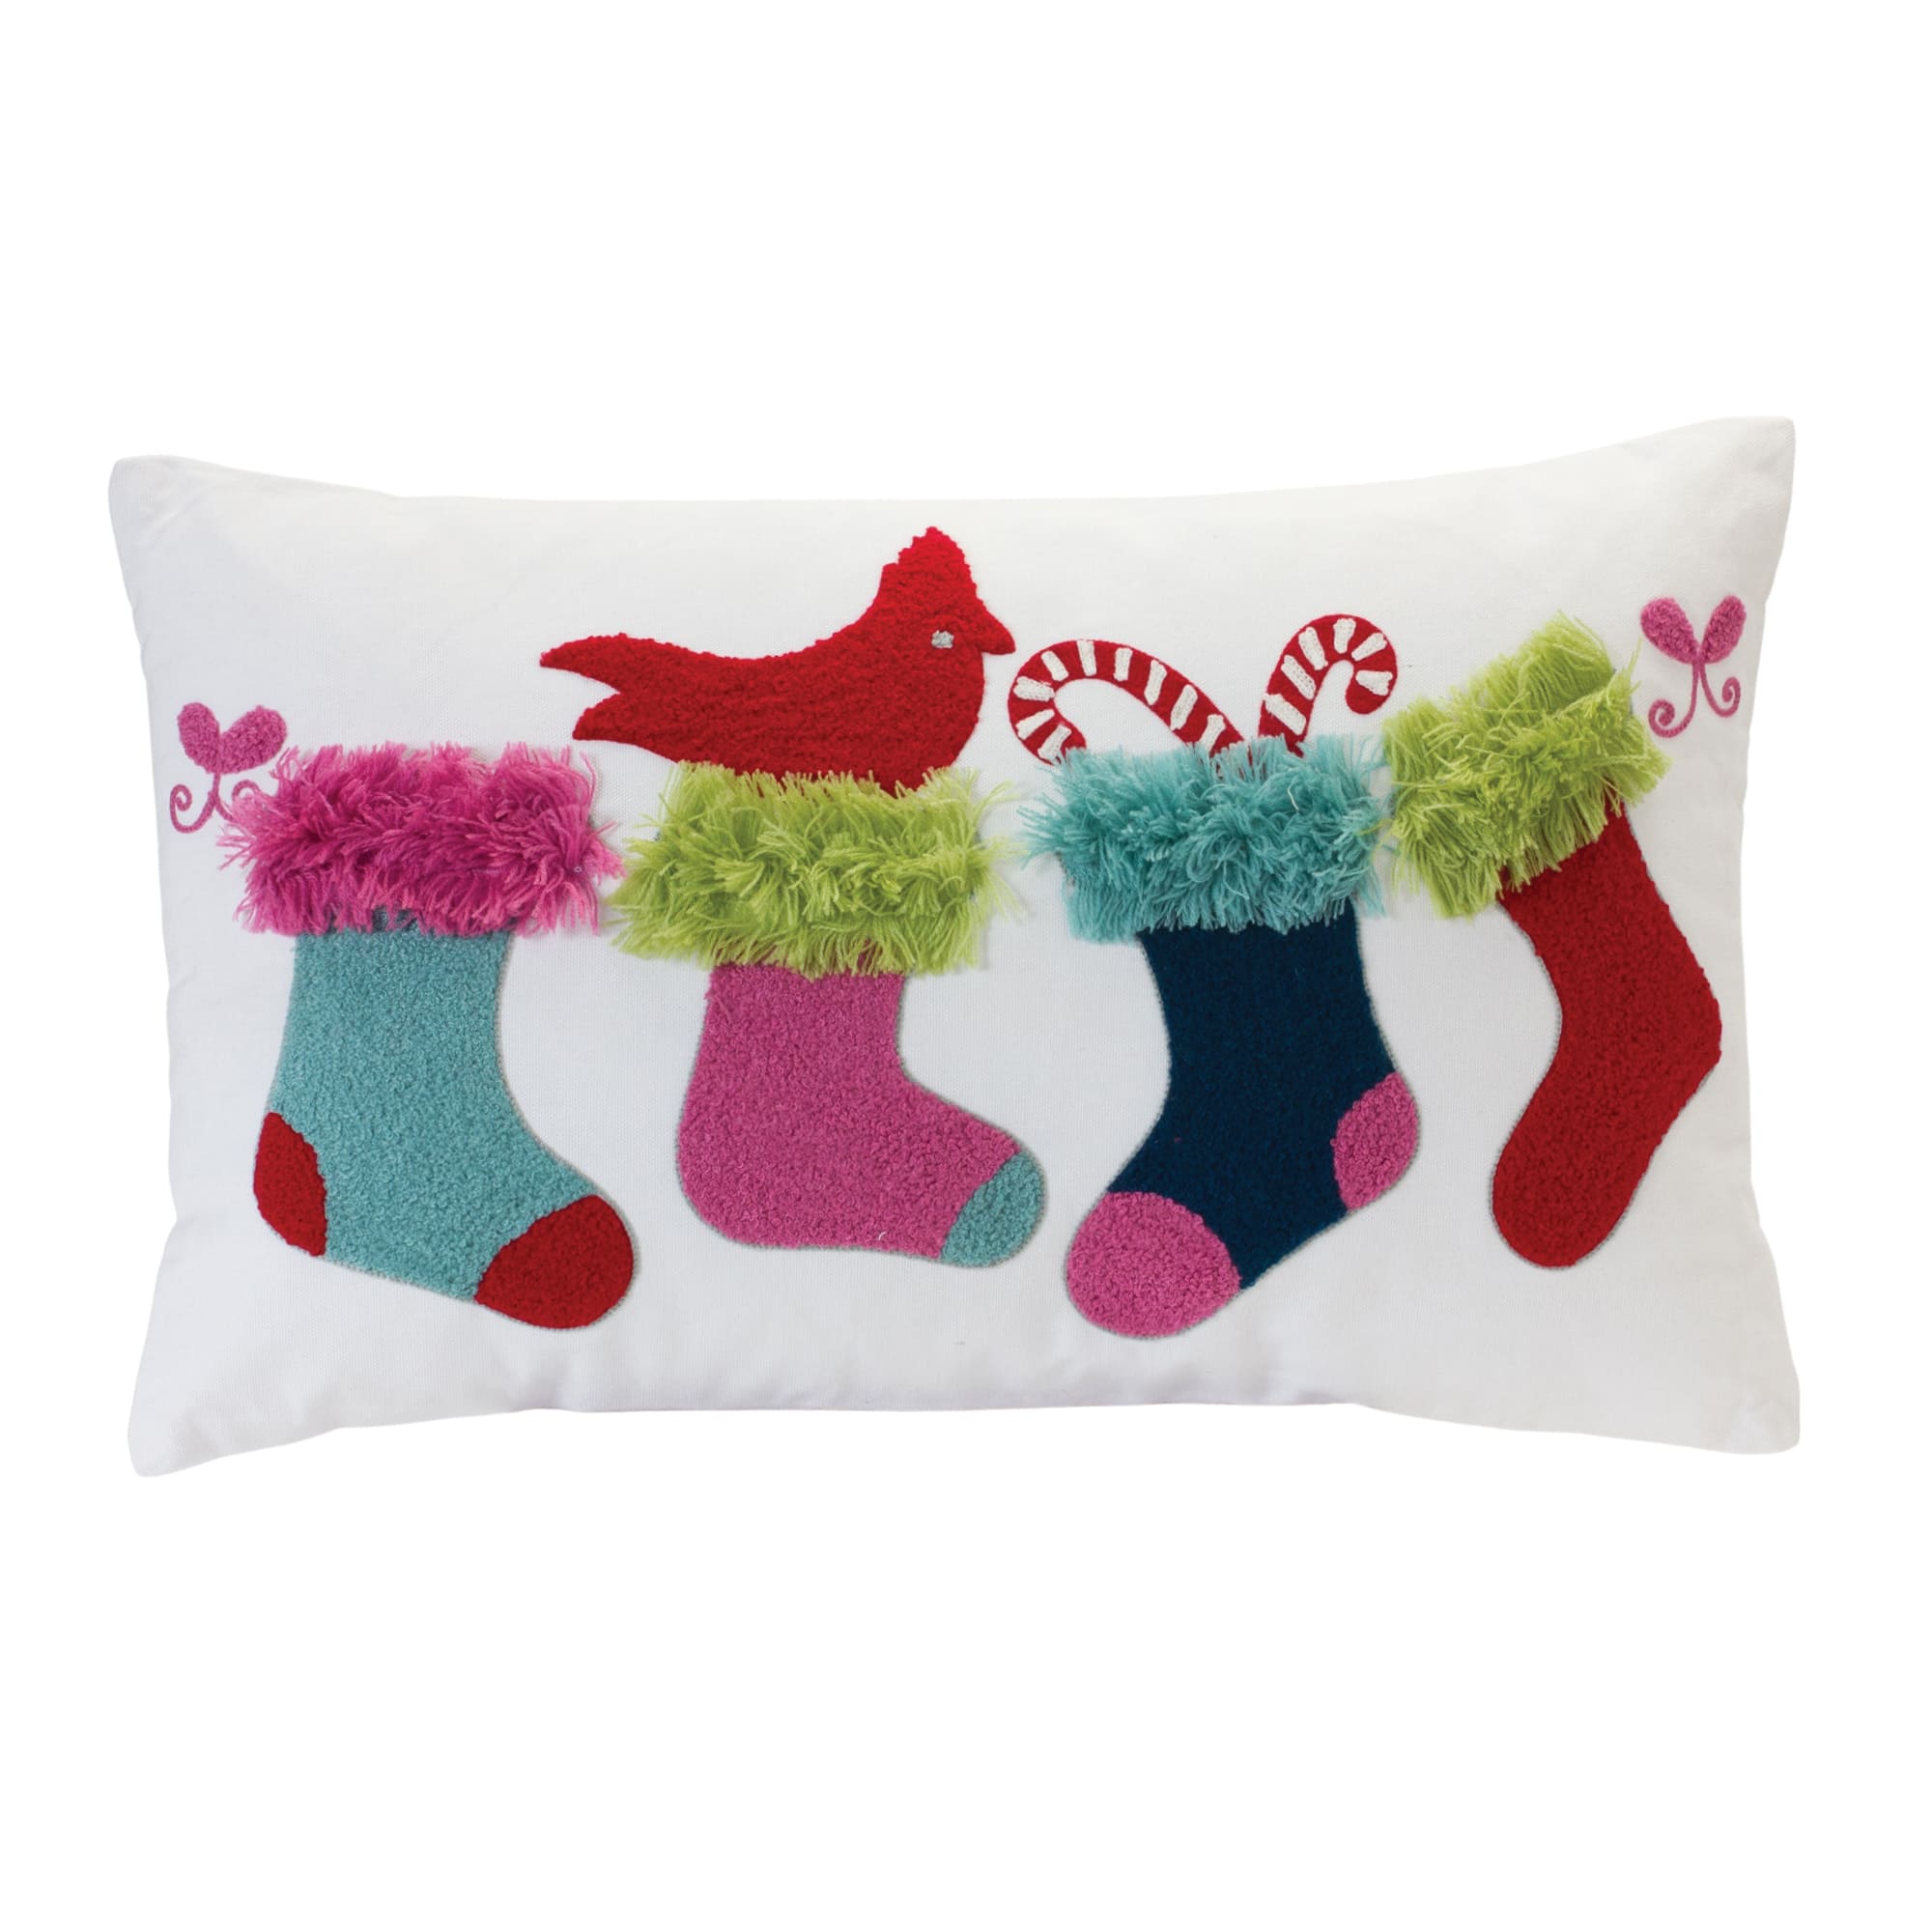 Colorful Stocking Holiday Pillow